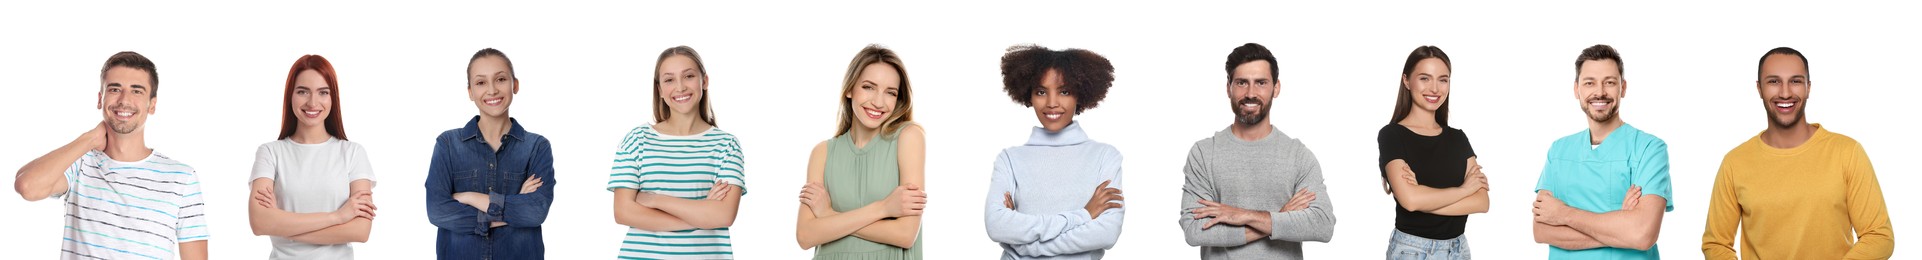 Image of Collage with portraits of happy people on white background